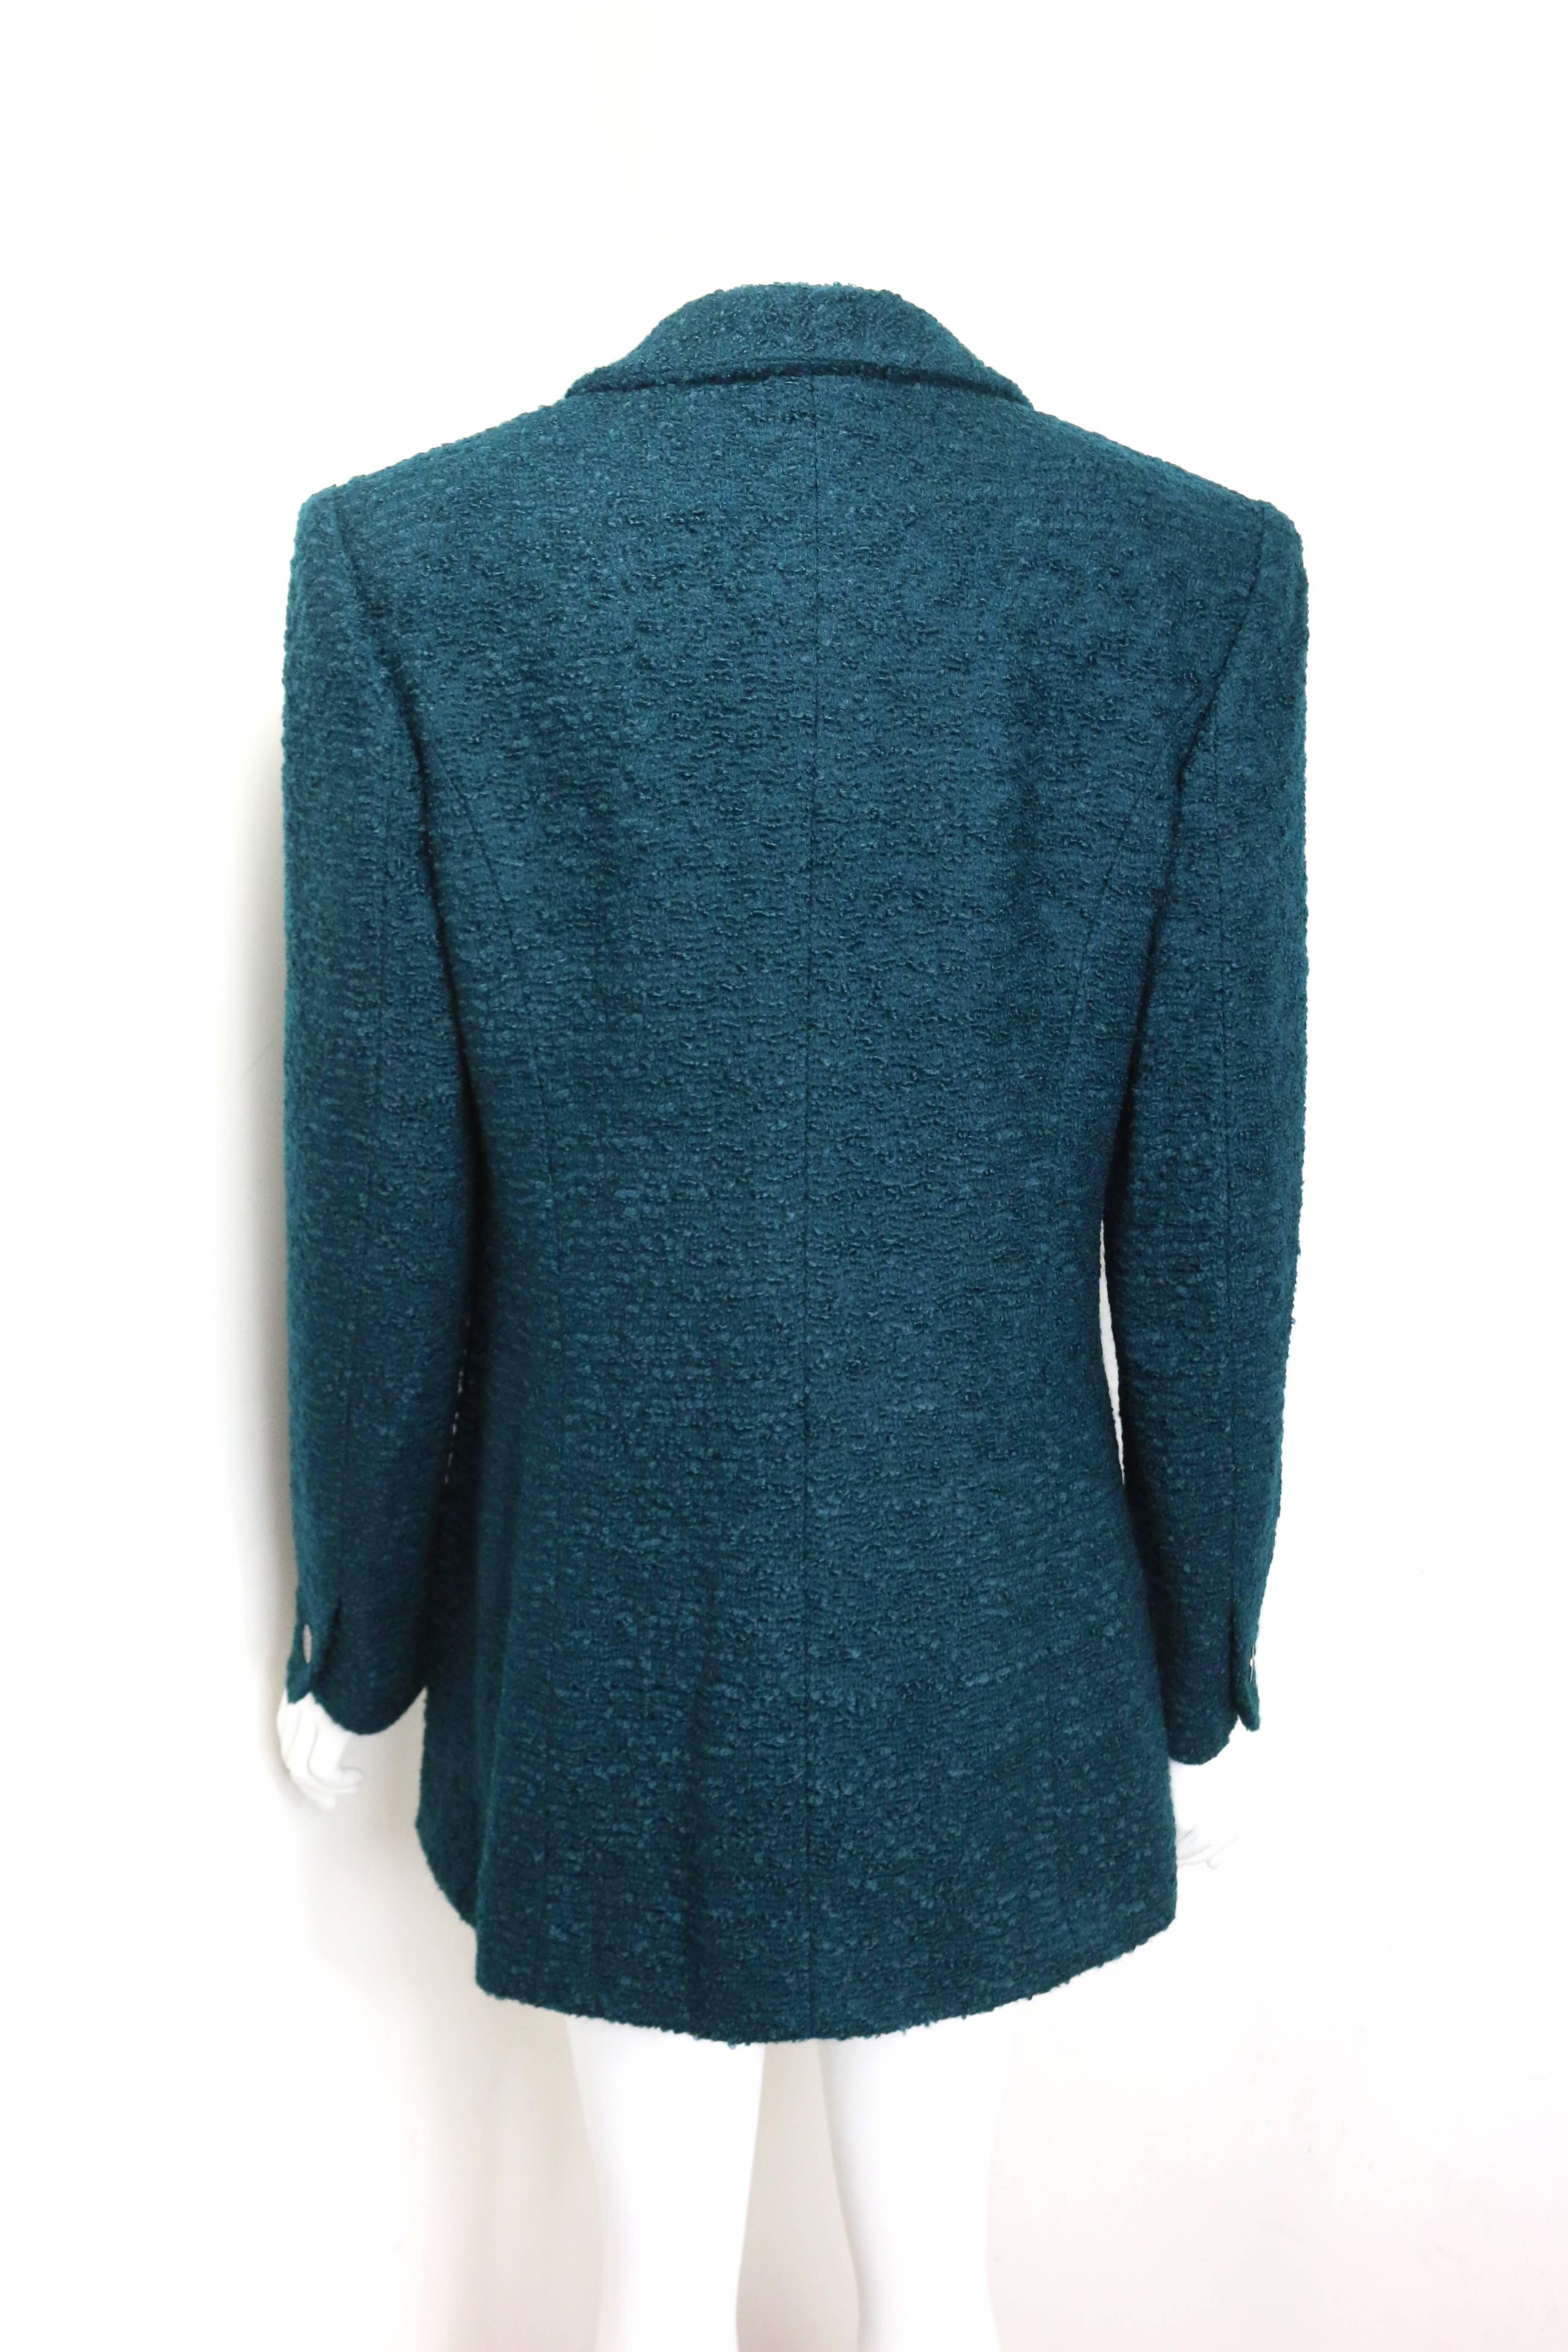 Women's Chanel Green Mohair and Boucle Wool Jacket (Unworn) For Sale